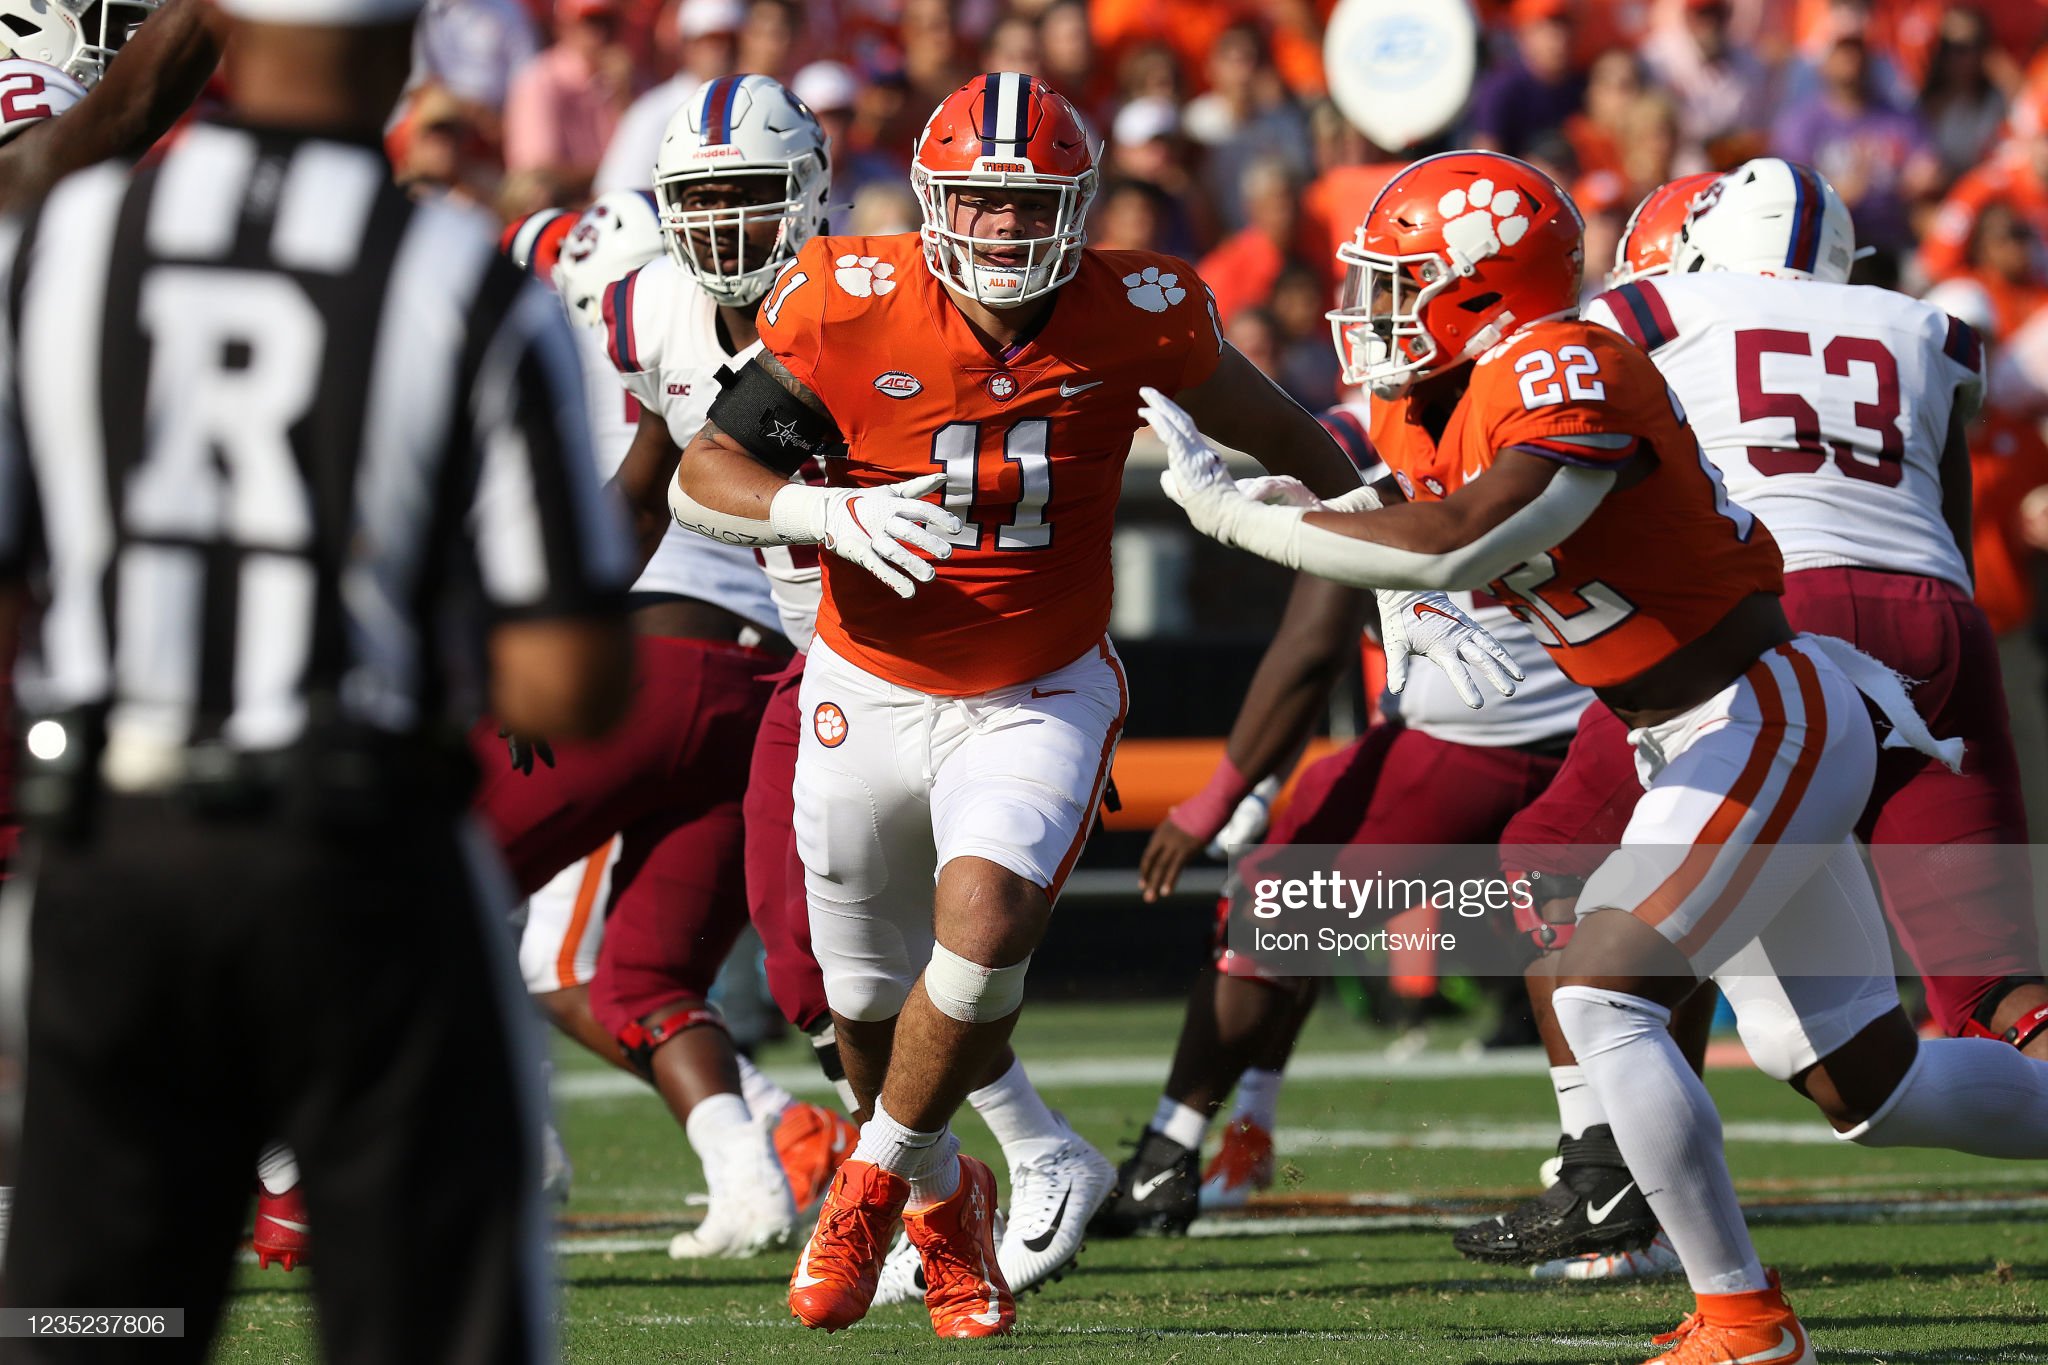 2023 NFL Draft Scouting Report: DT Bryan Bresee, Clemson